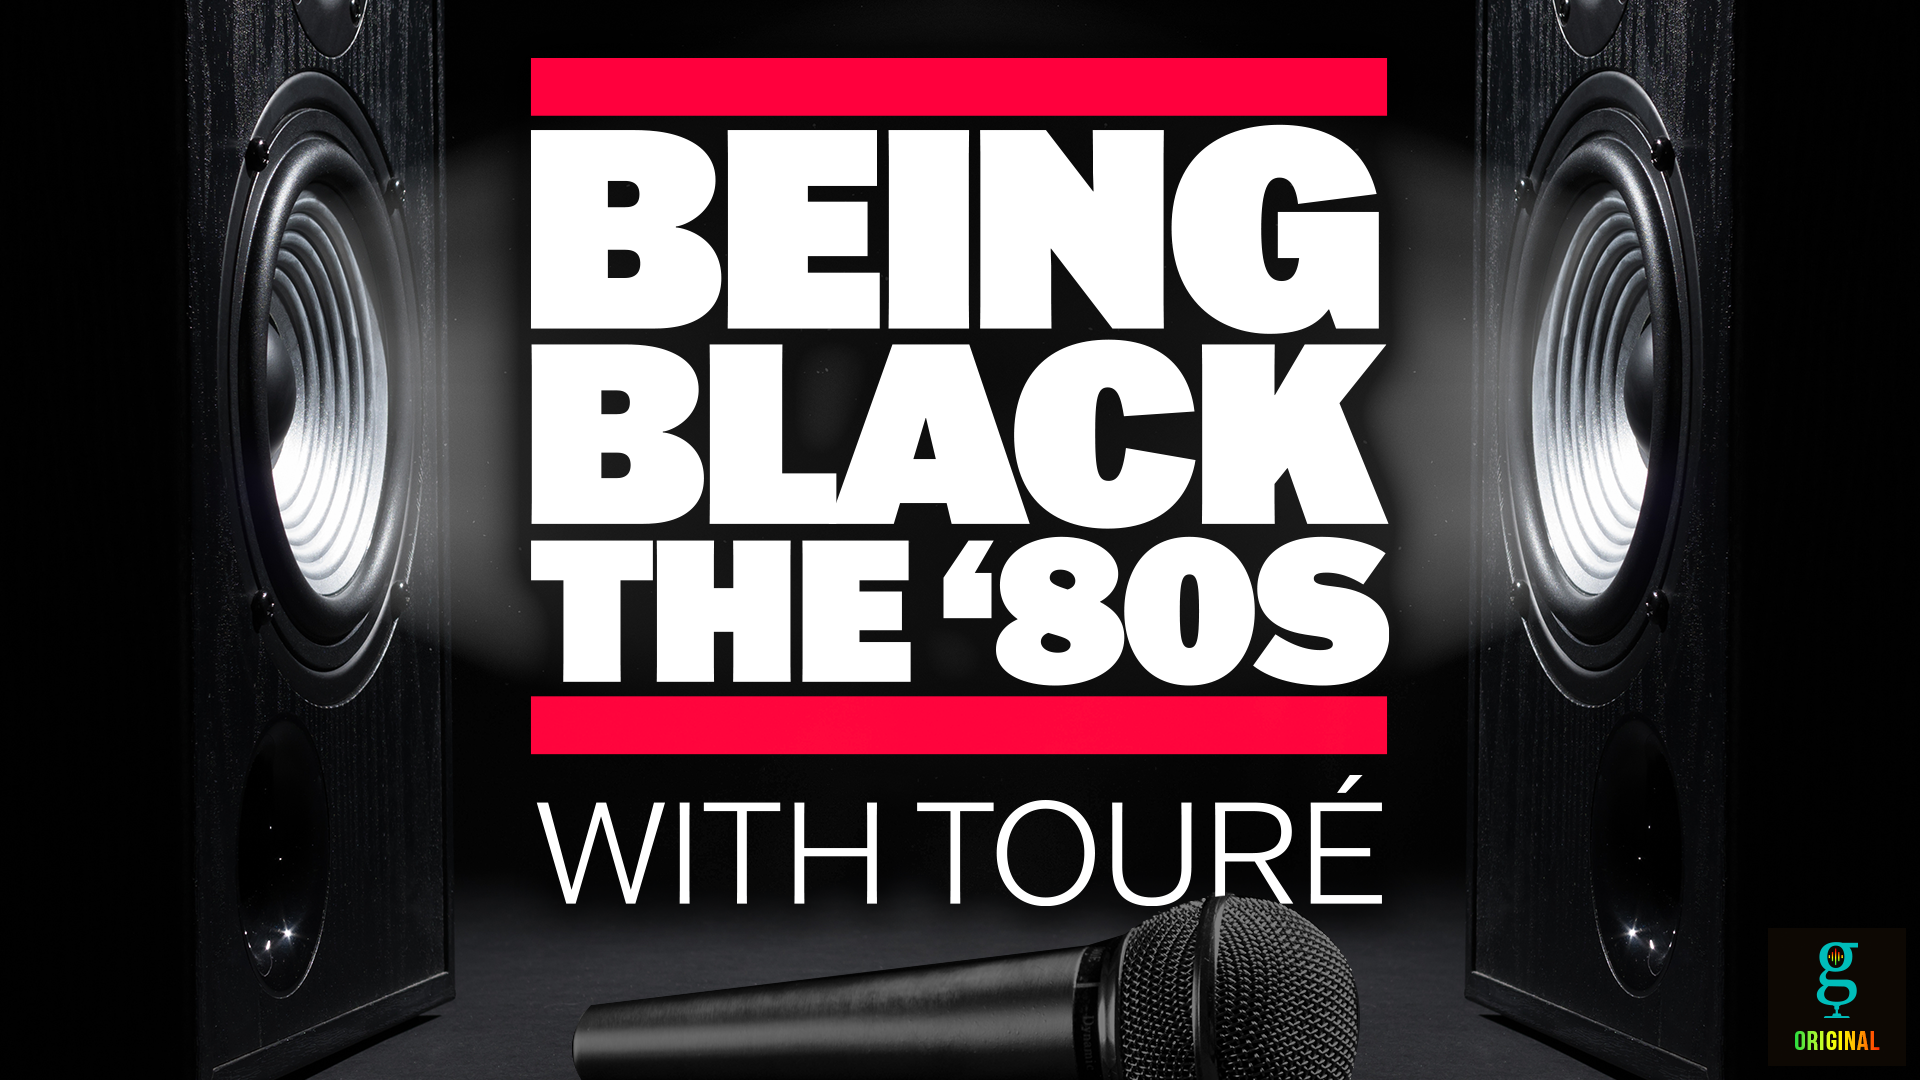 ‘Being Black: The ’80s’ is my new podcast about Black music and politics in the 1980s